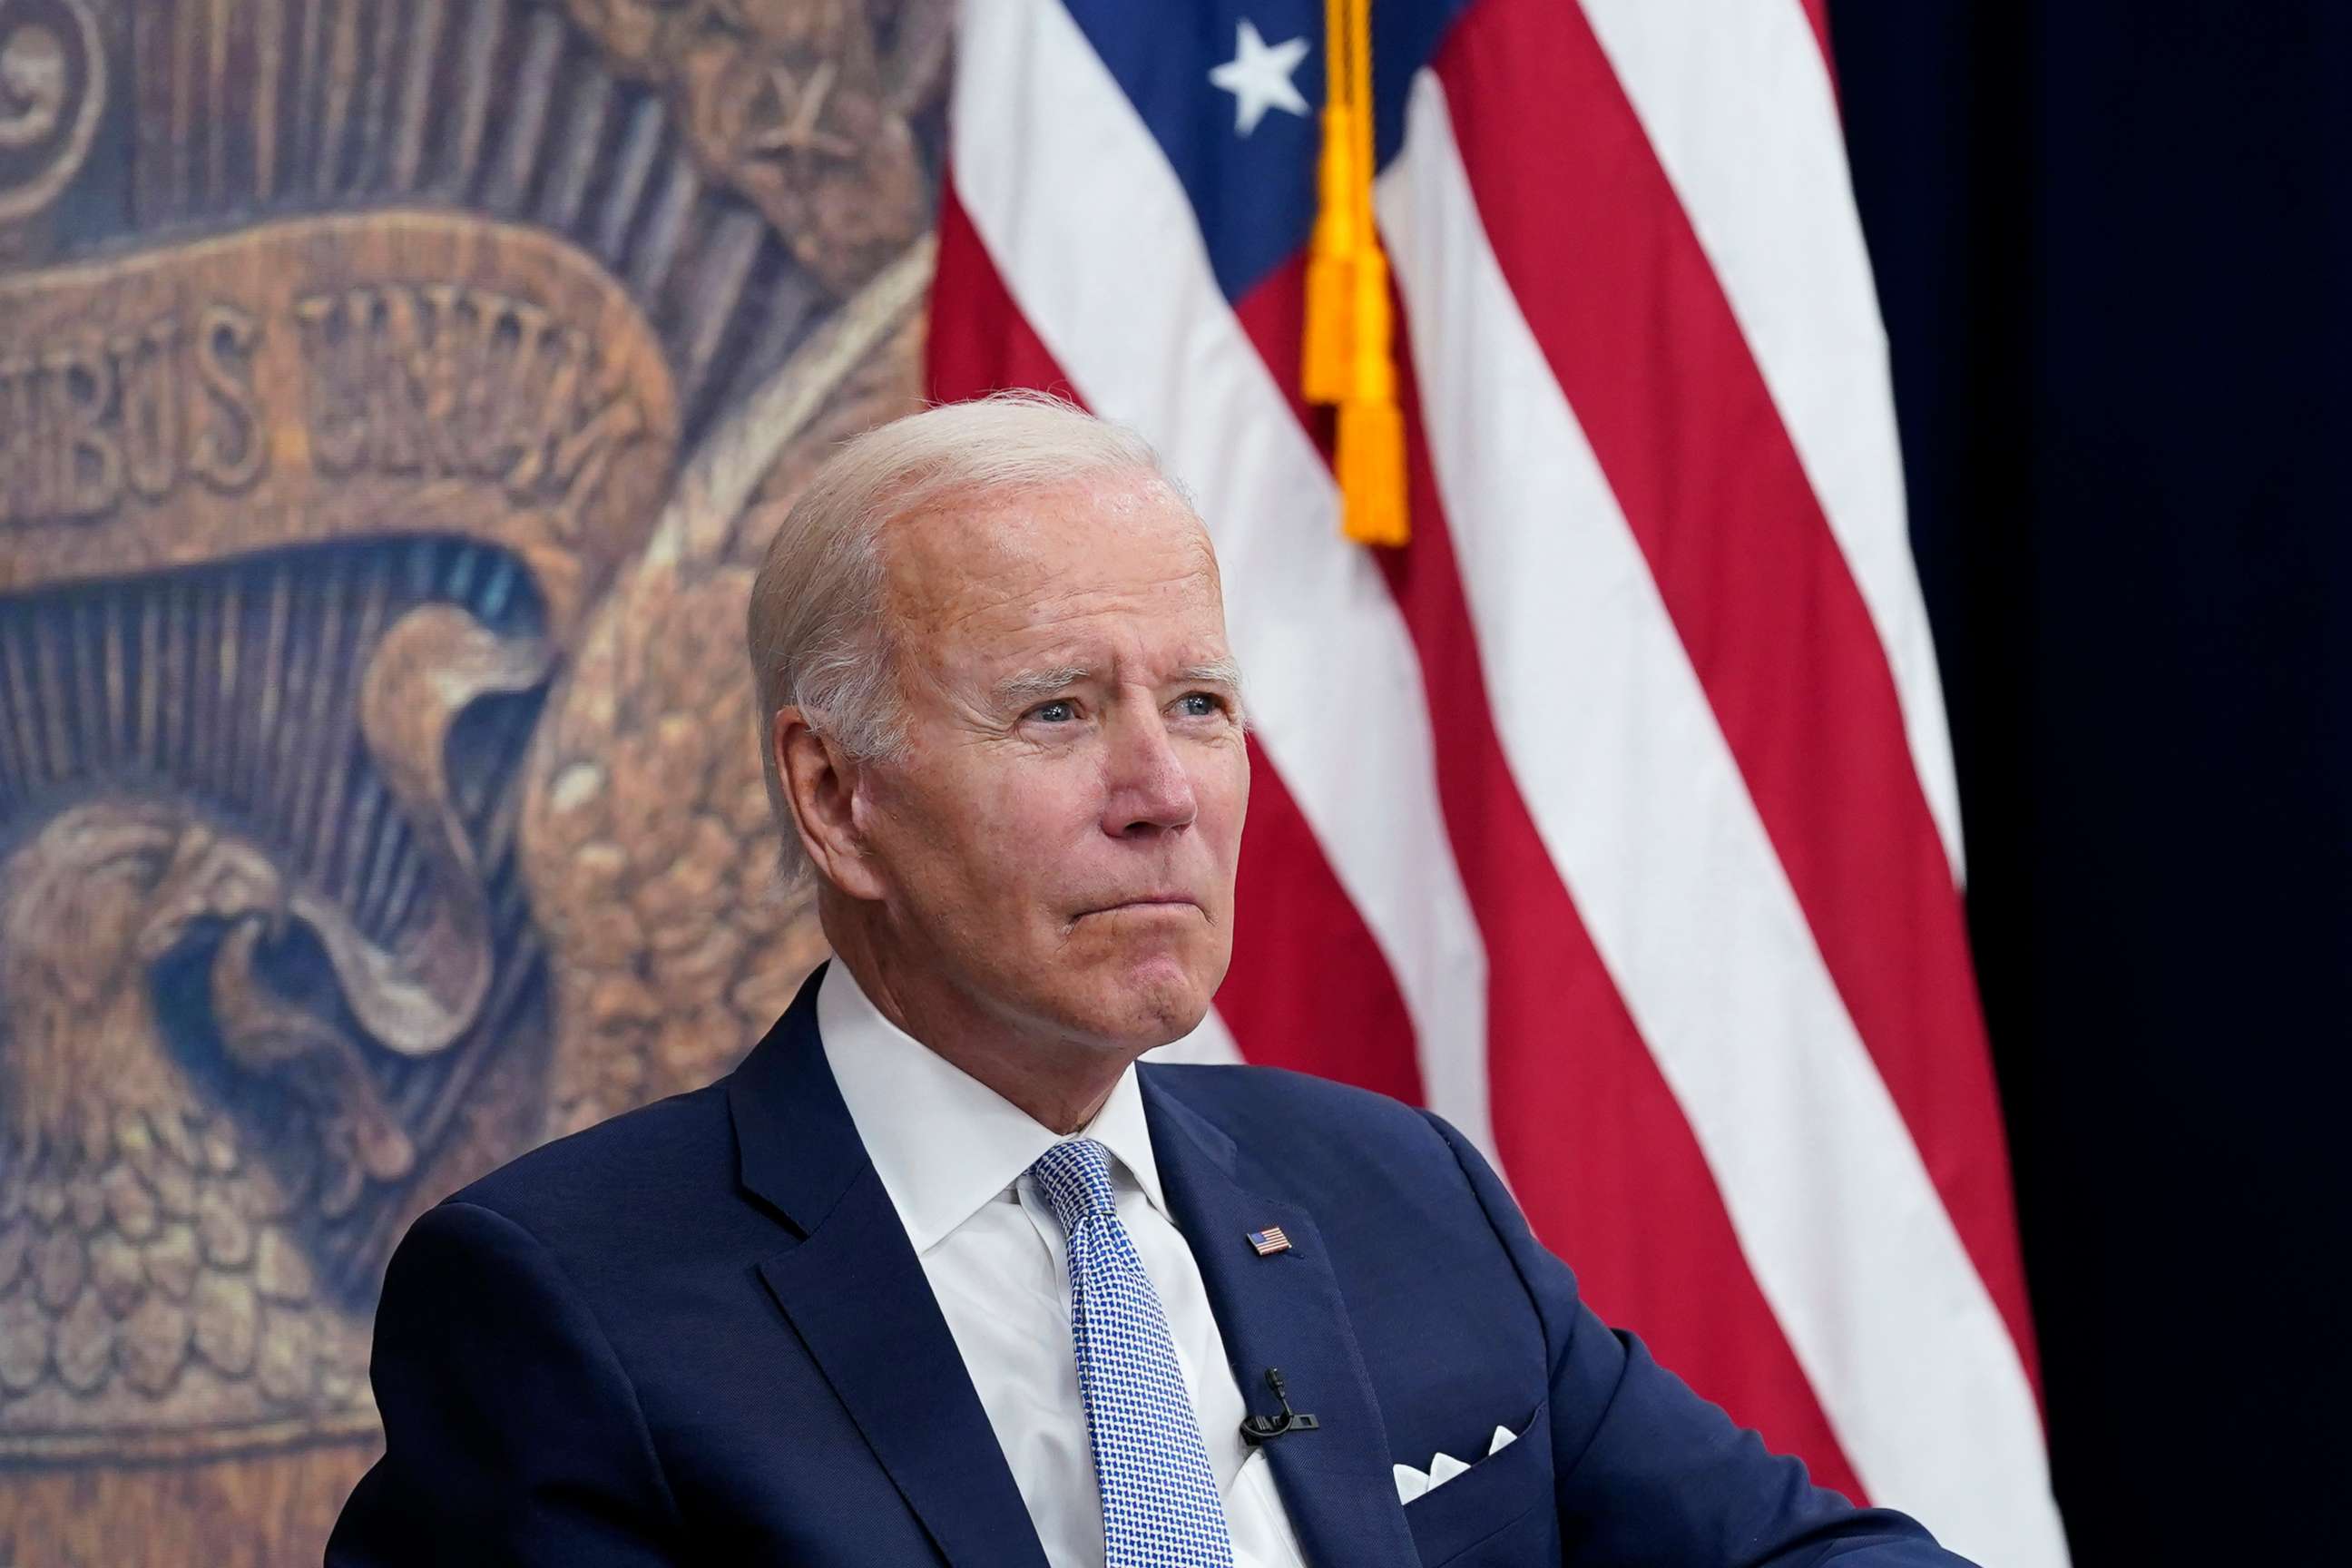 PHOTO: In this July 28, 2022, file photo, President Joe Biden listens during a meeting with CEOs in the South Court Auditorium on the White House complex in Washington, D.C.